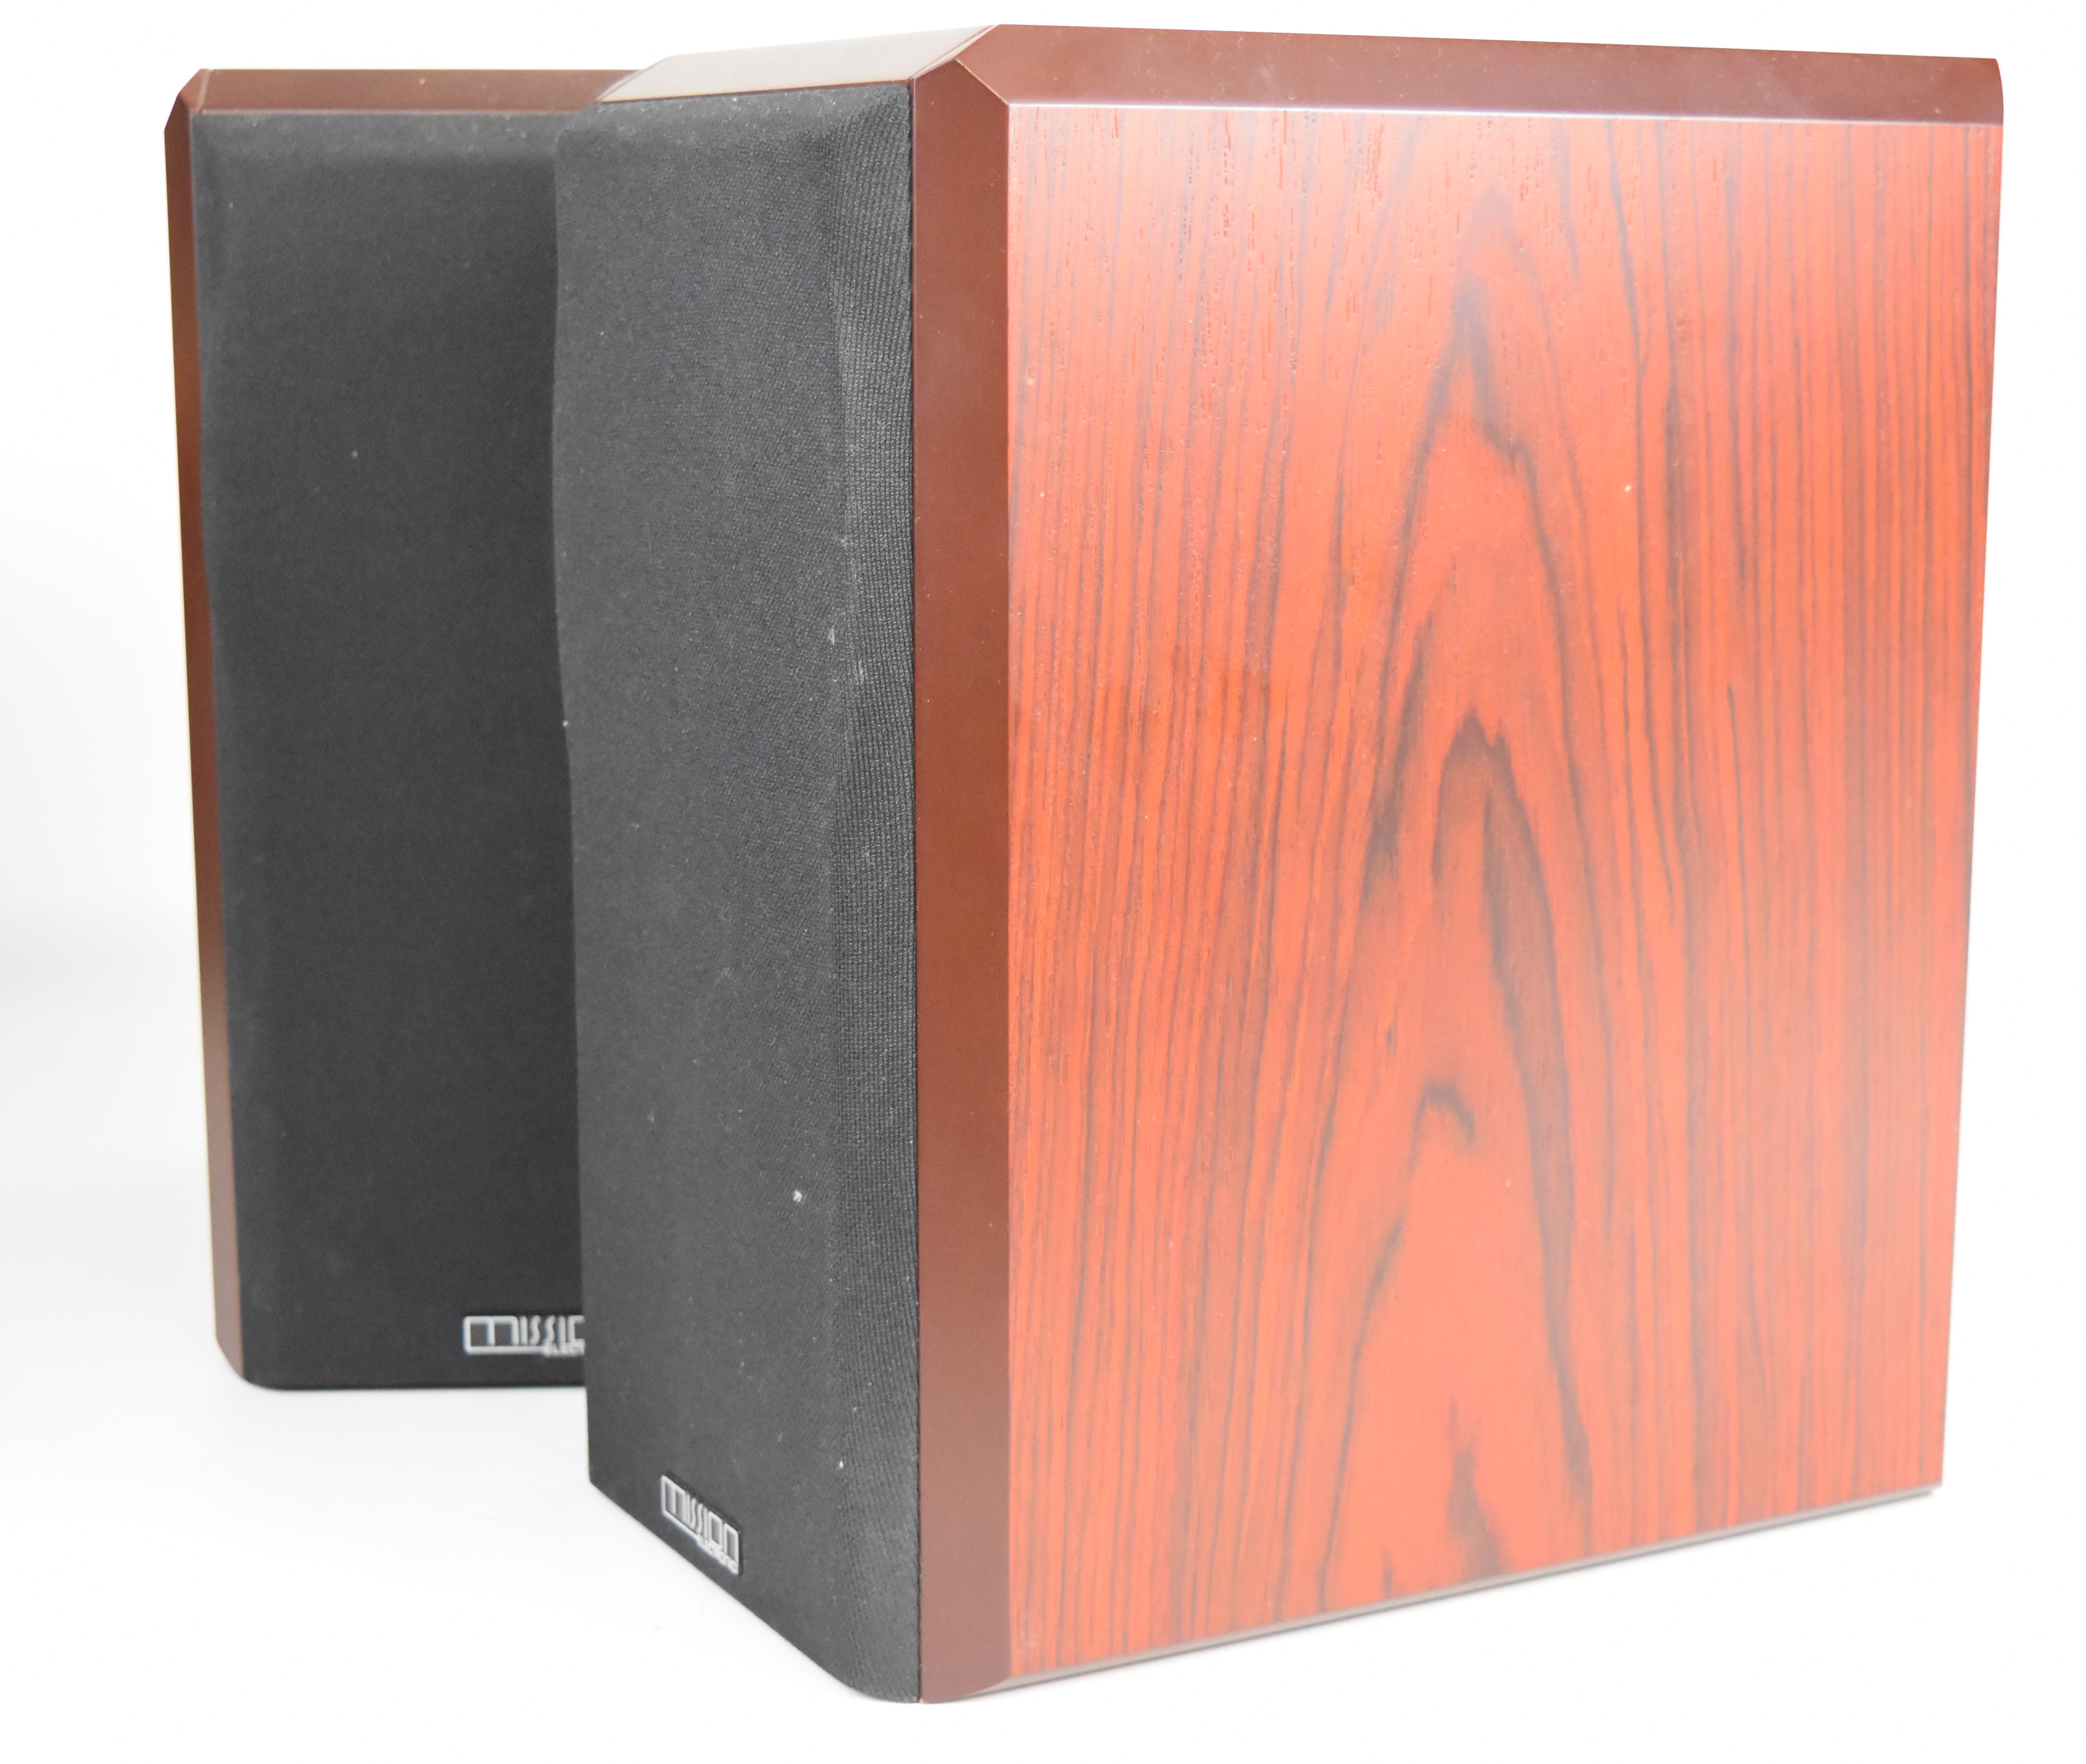 Pair of Mission 751 speakers in rosewood casing, height 32cm, made in England. - Image 2 of 3